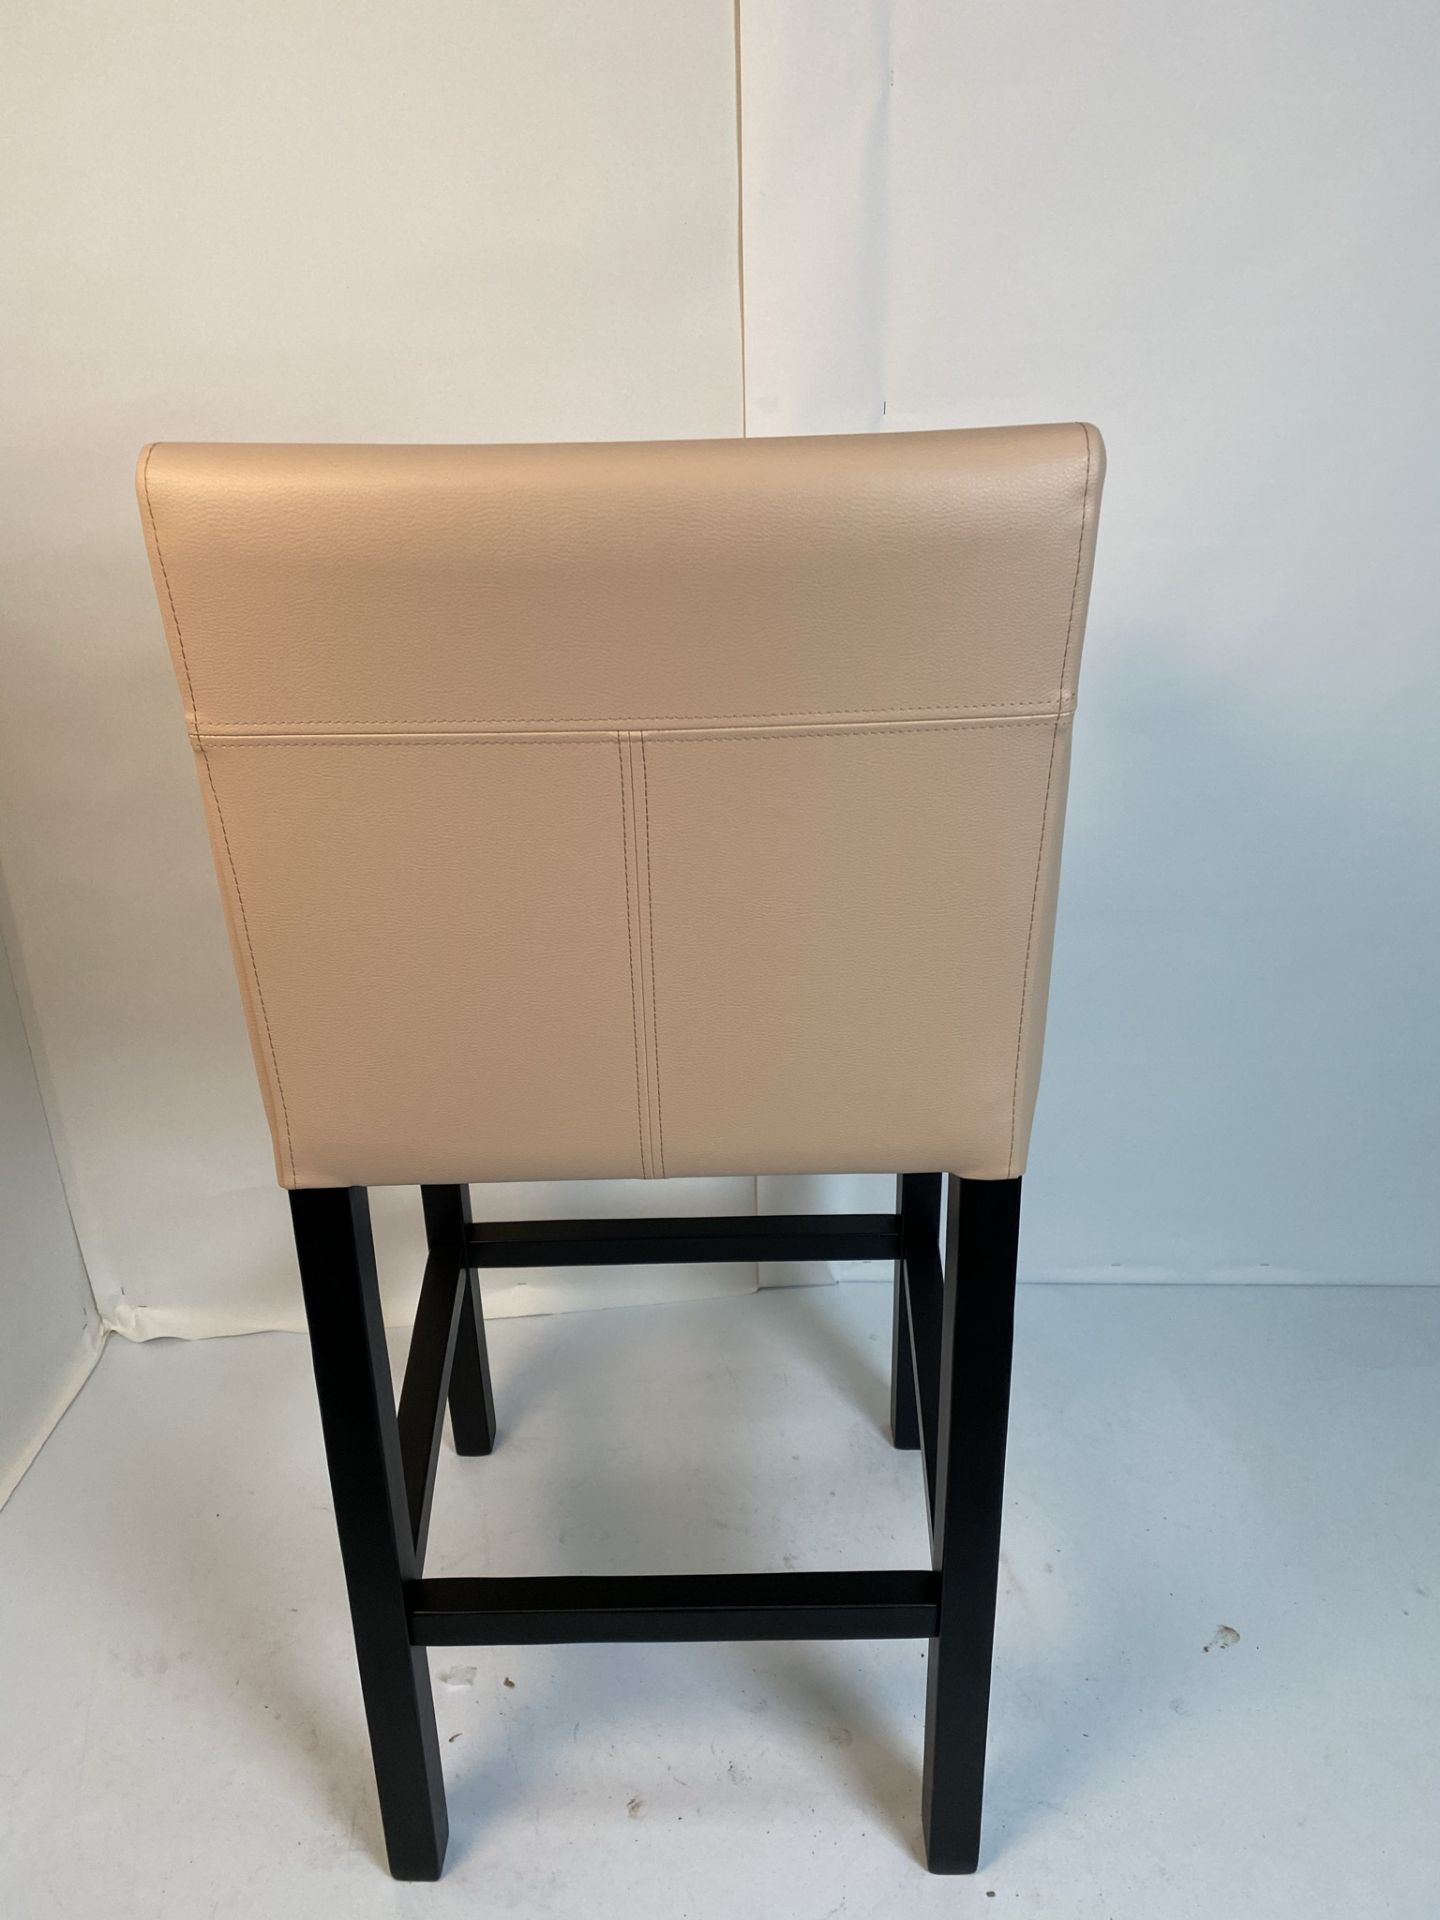 A Vista Vena BE-10 Cappuchino high stool with black wood frame - Image 6 of 8